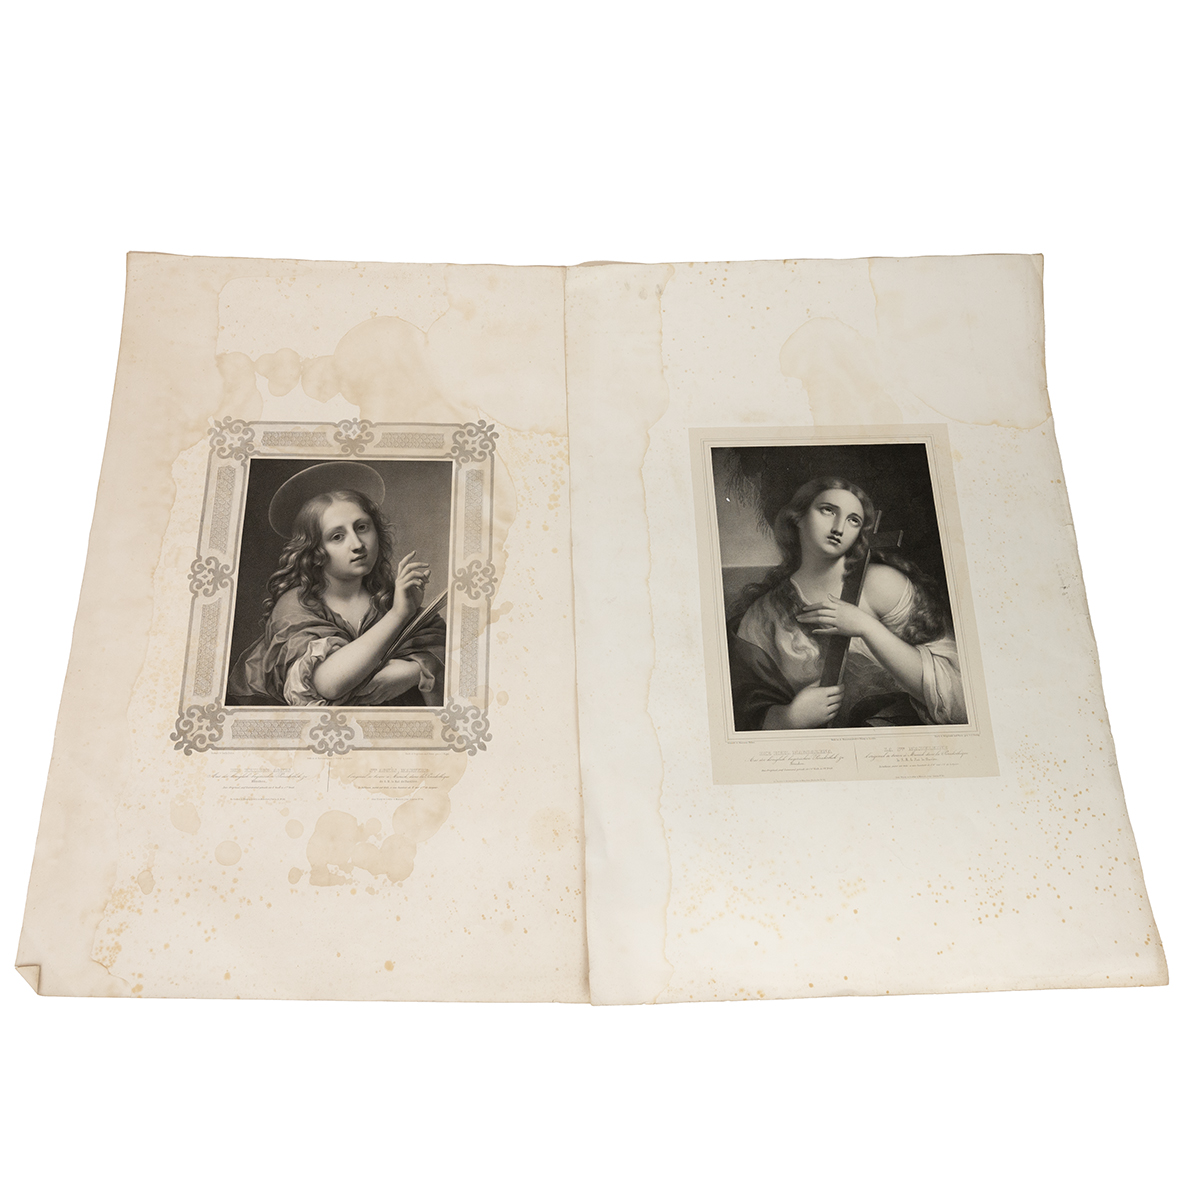 After Carlo Dolci (1616-1686) by V. Leng (fl. early 19th century) - St. Agnes Martyr, lithograph ...